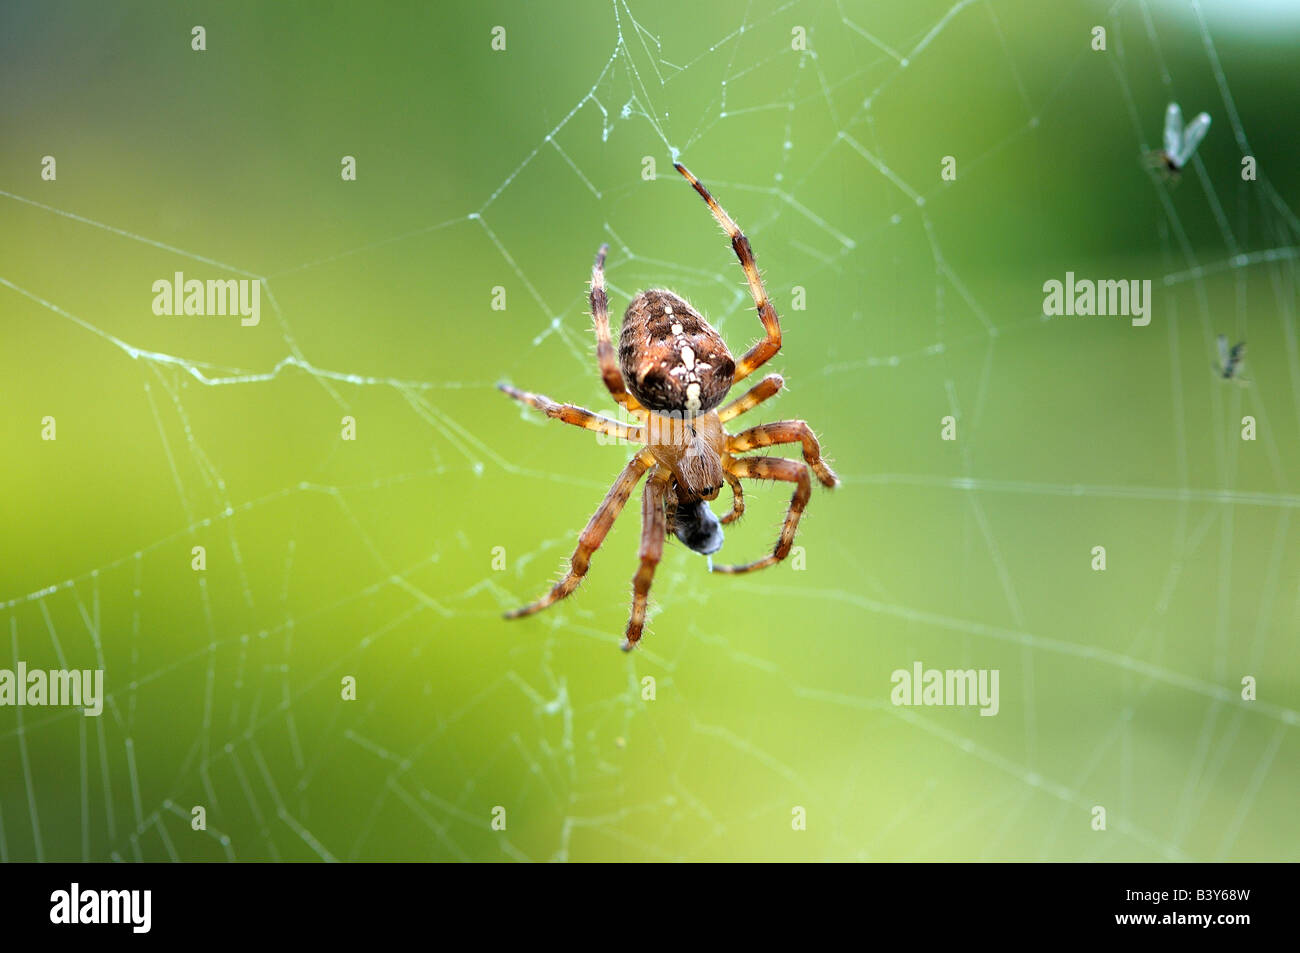 The Garden Spider Araneus diadematus or diadem spider also called the cross spider in Eastern Europe in it web waiting for prey Stock Photo